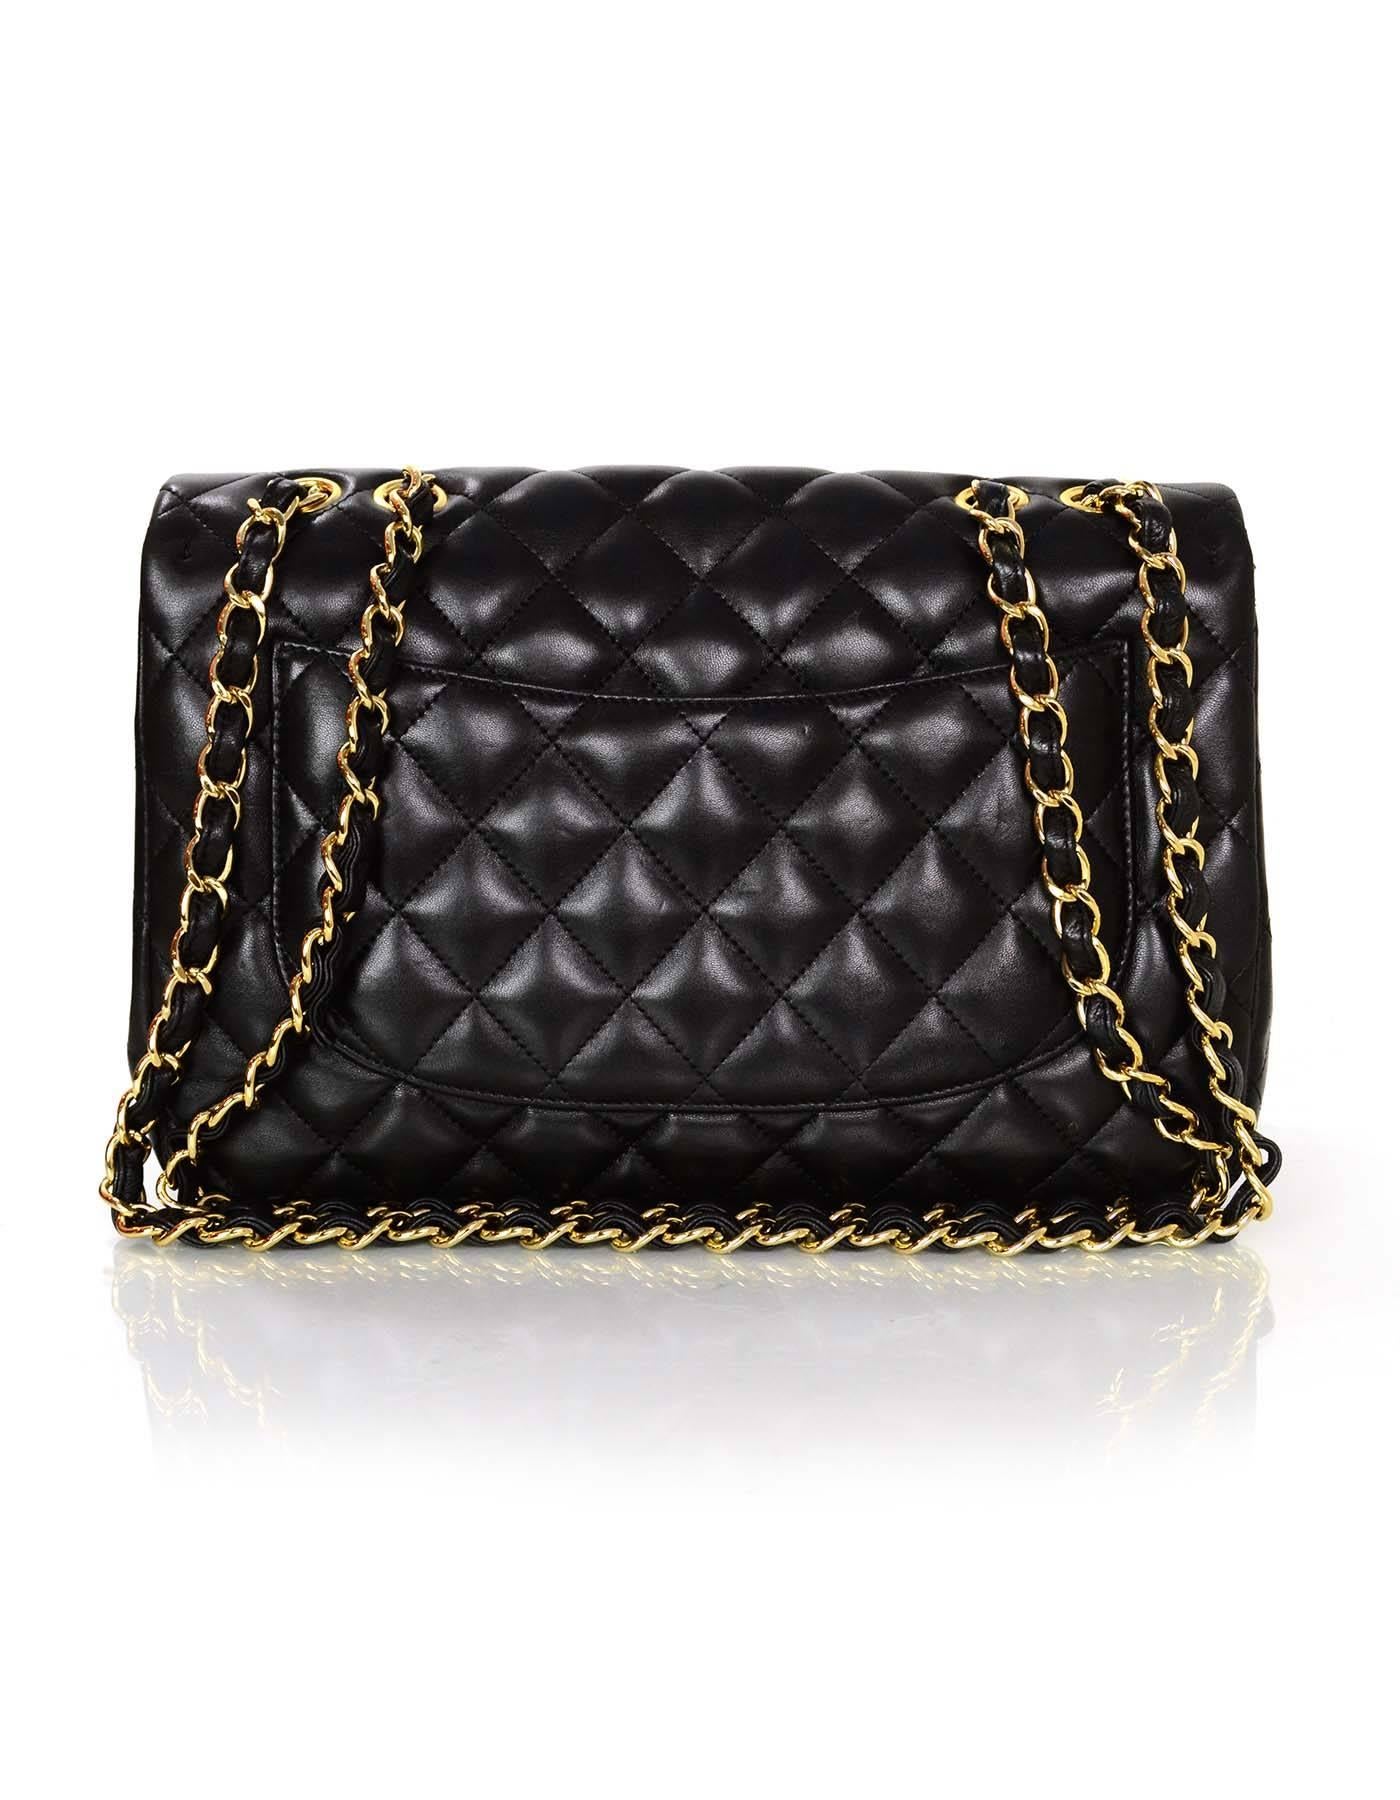 Chanel Black Lambskin Leather Single Flap Jumbo Bag with GHW In Excellent Condition In New York, NY